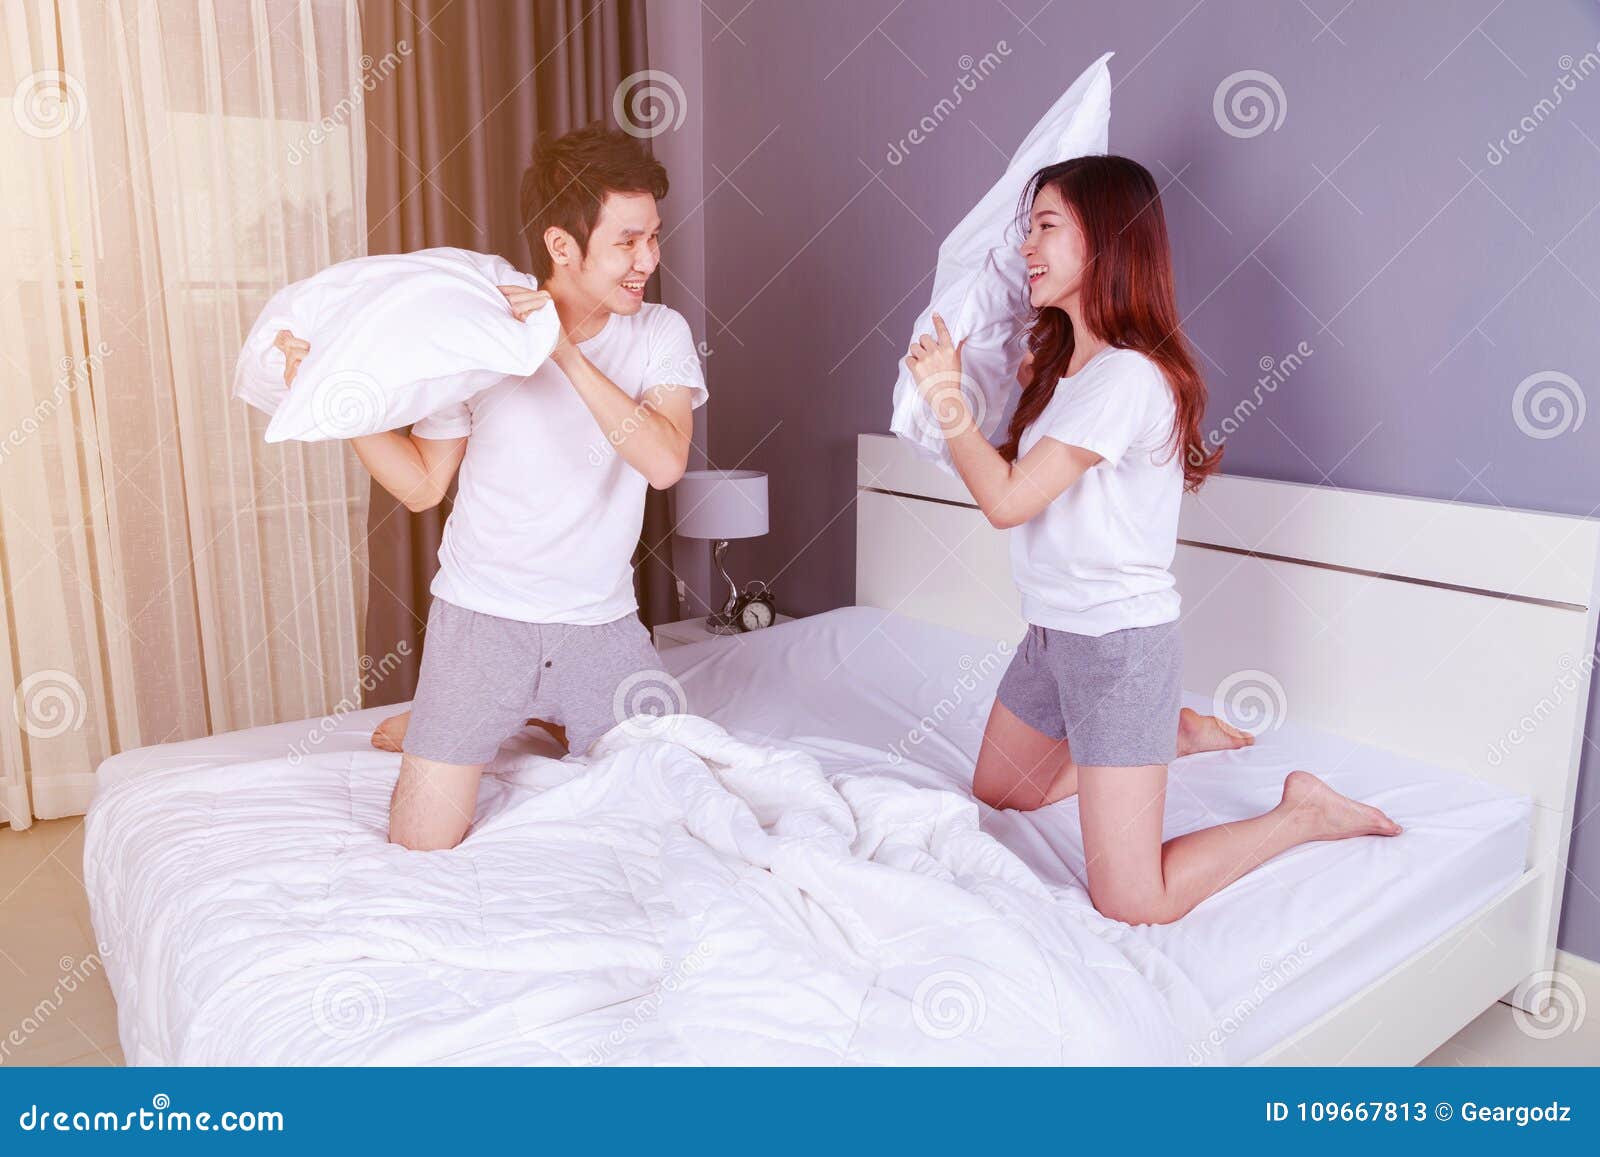 Cheerful Young Couple Having A Pillow Fight On B